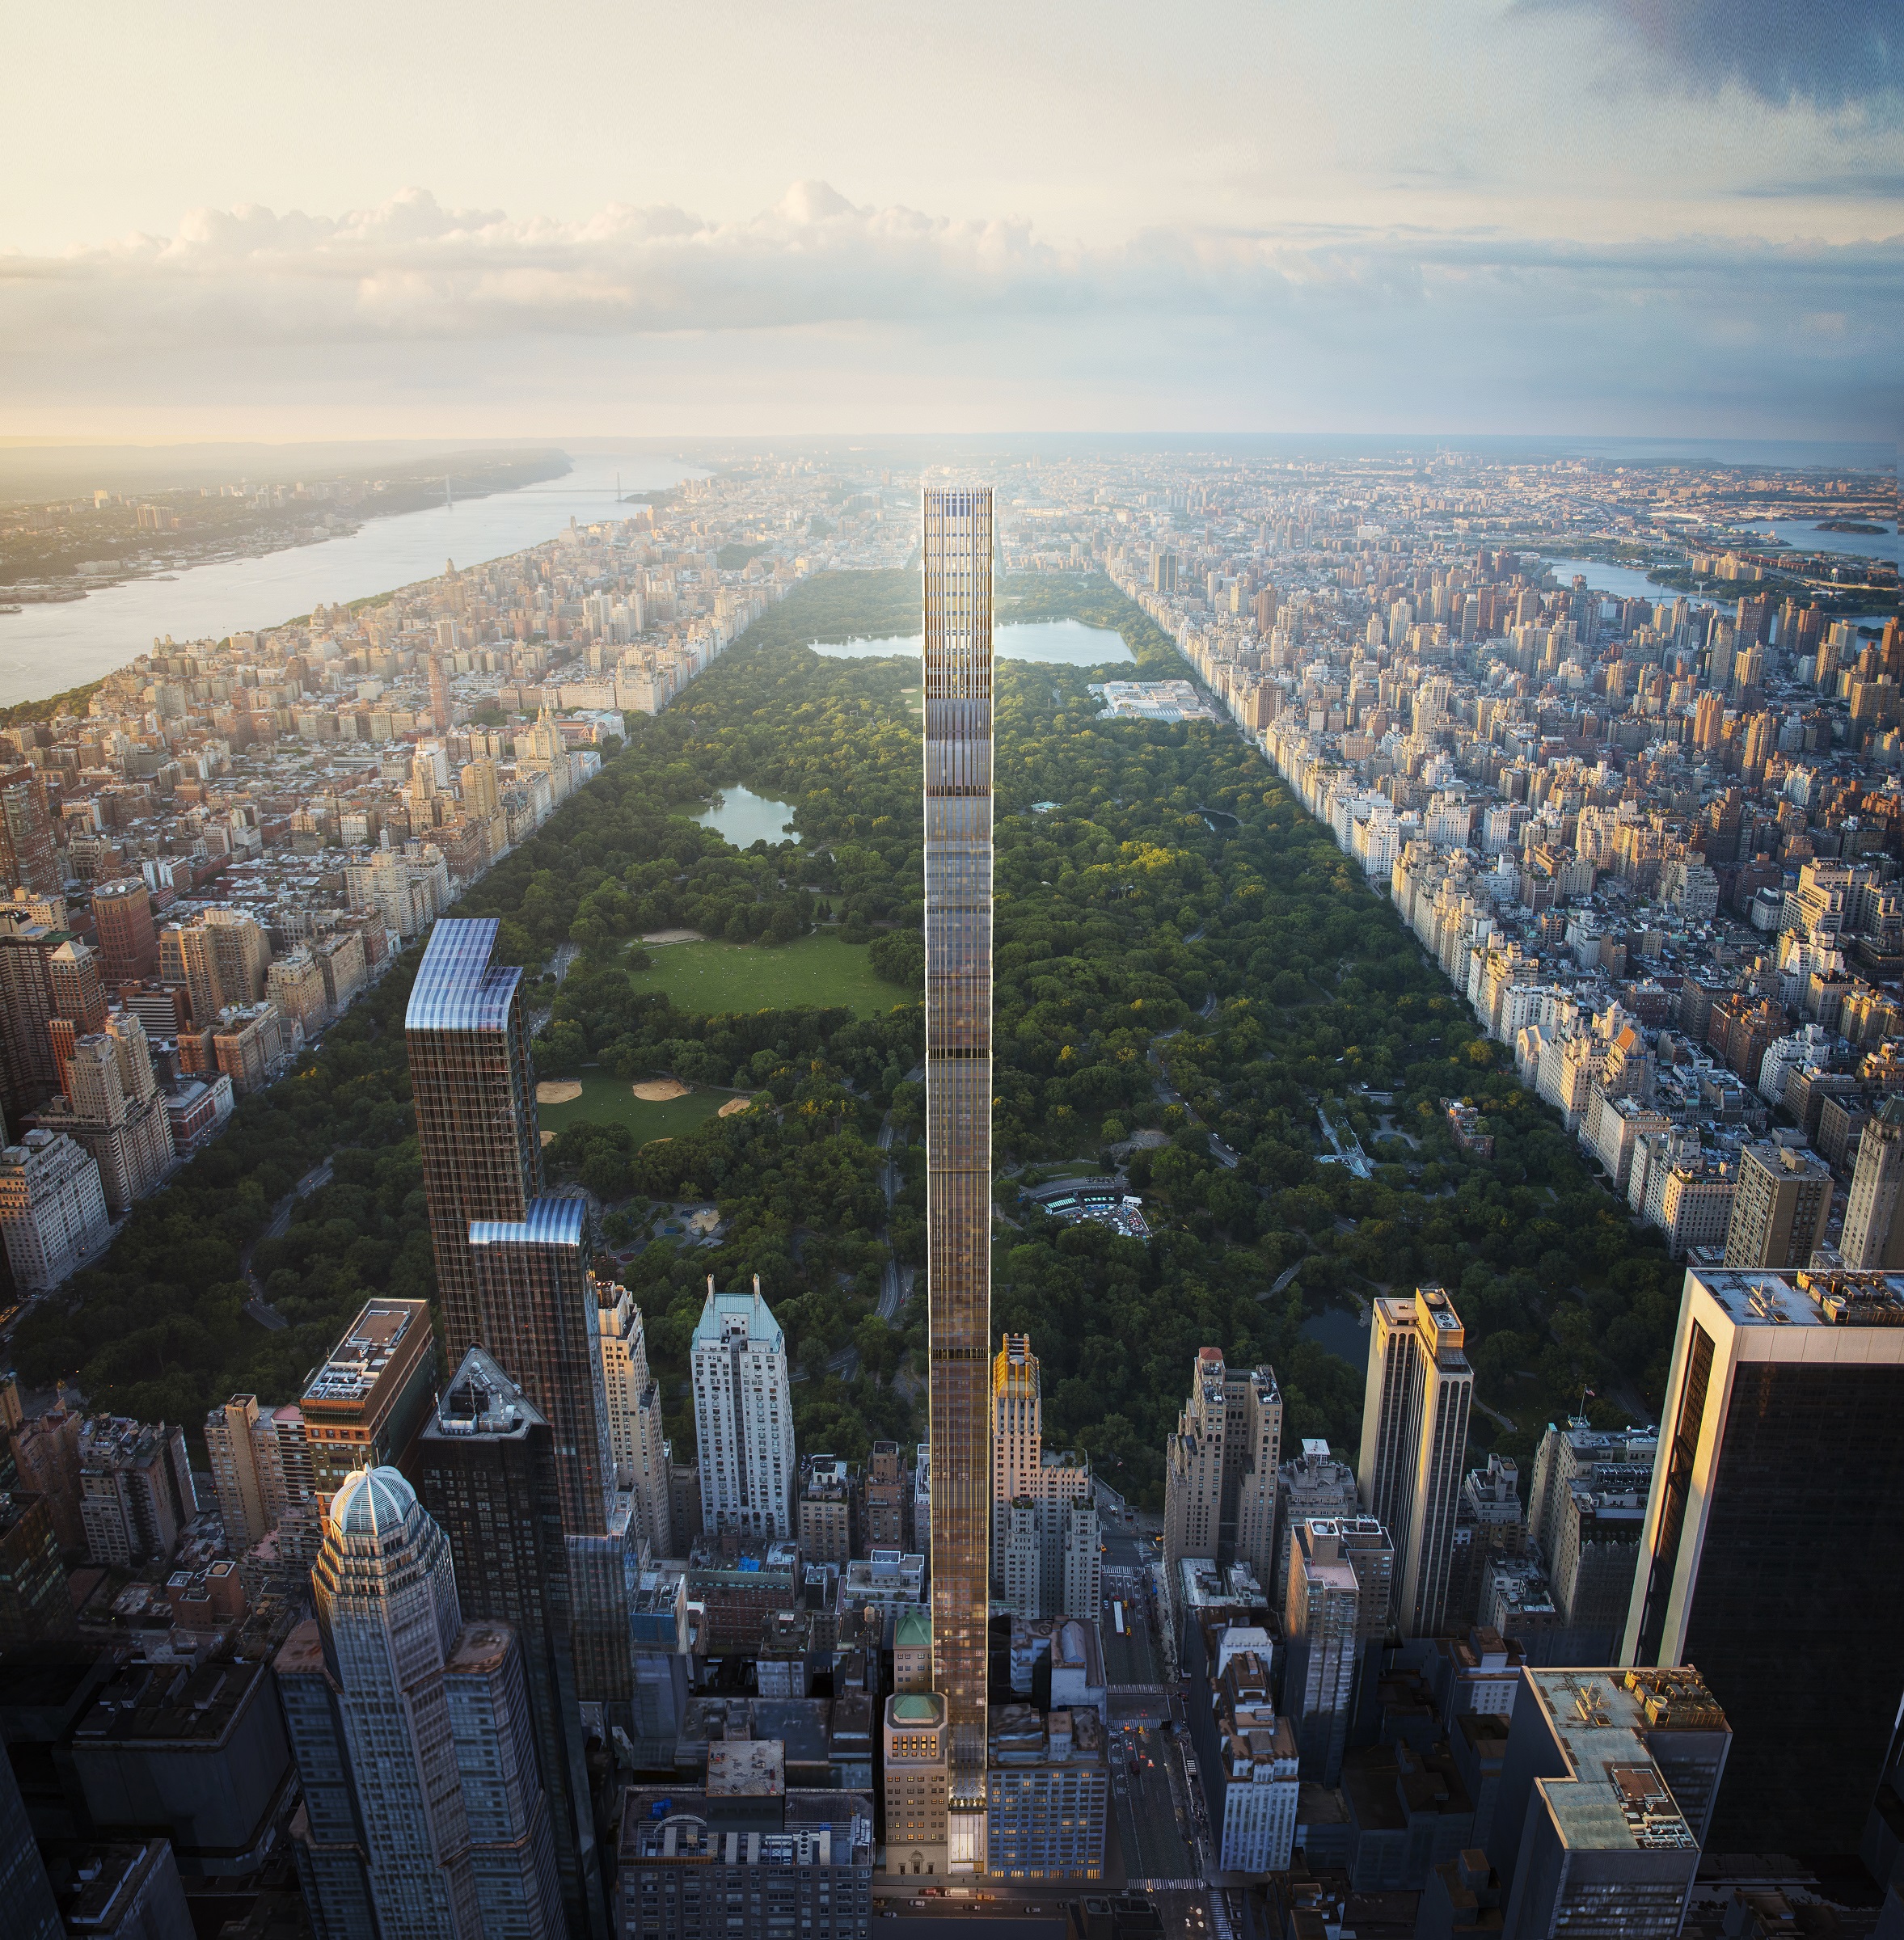 Aerial image of 111 West 57th street condominiums includes a view of Central Park and other buildings in New York City.